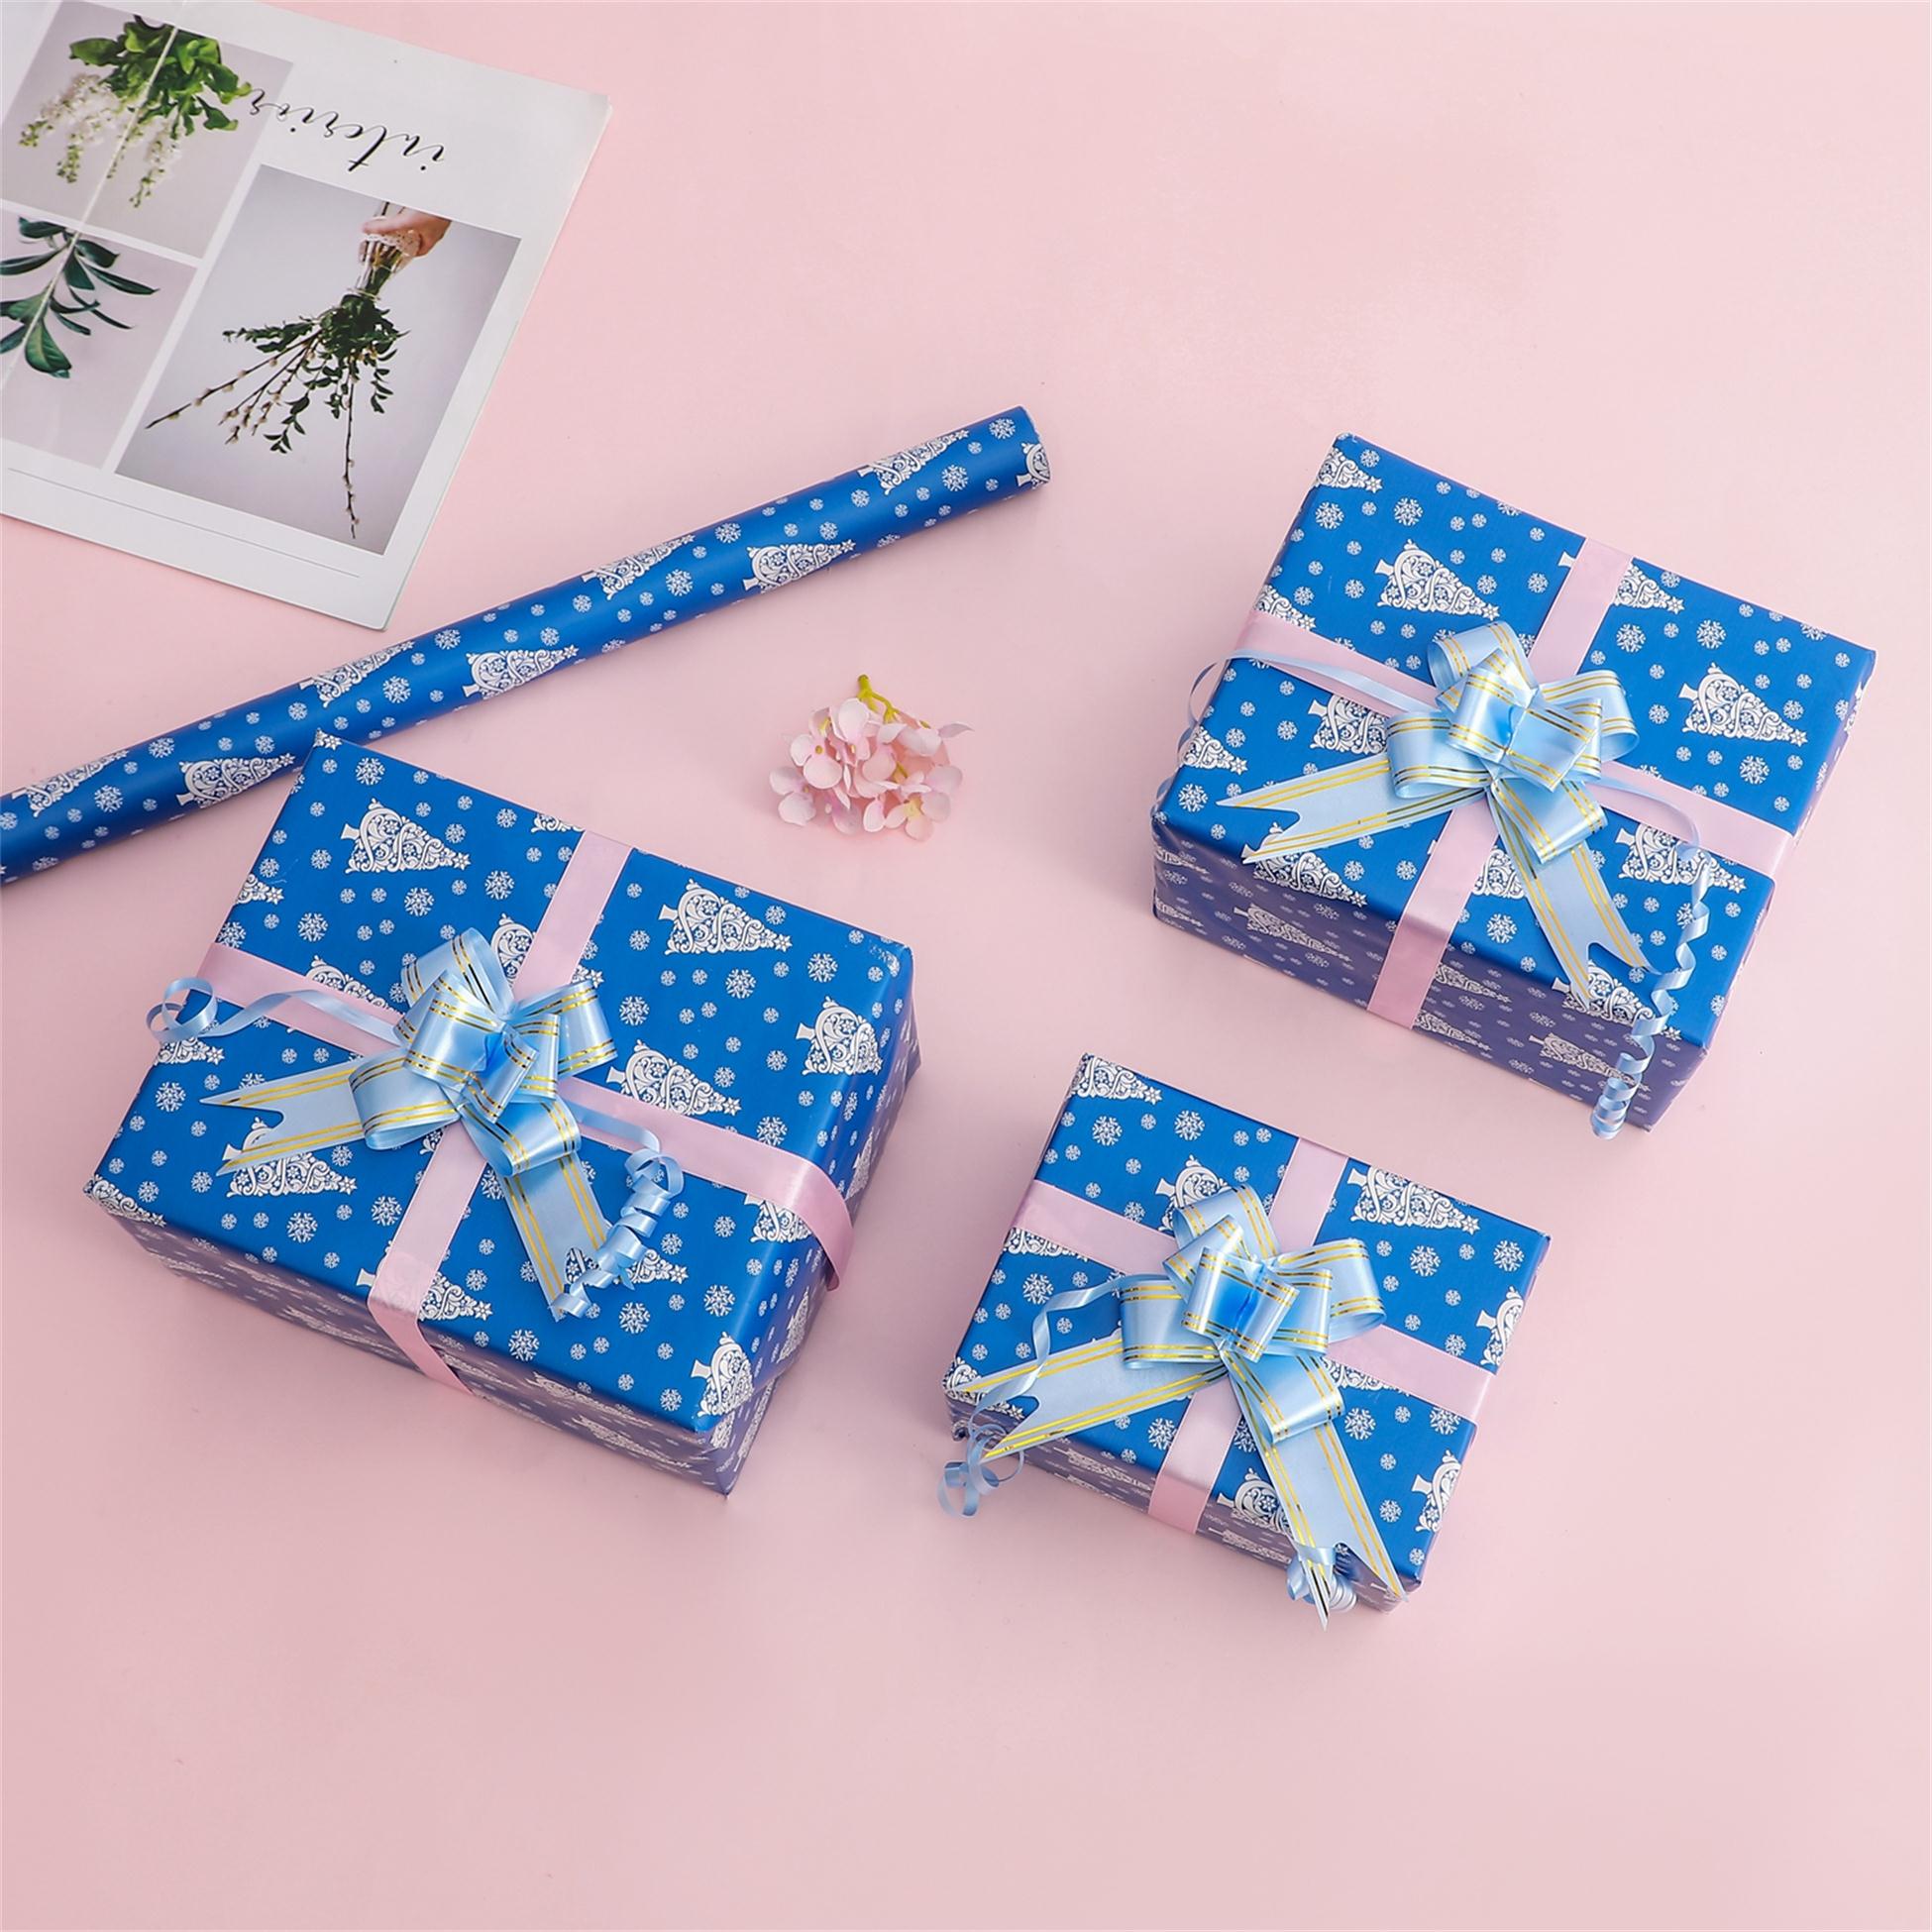 Jialan Package wrapping paper rolls factory price for birthday gifts-1